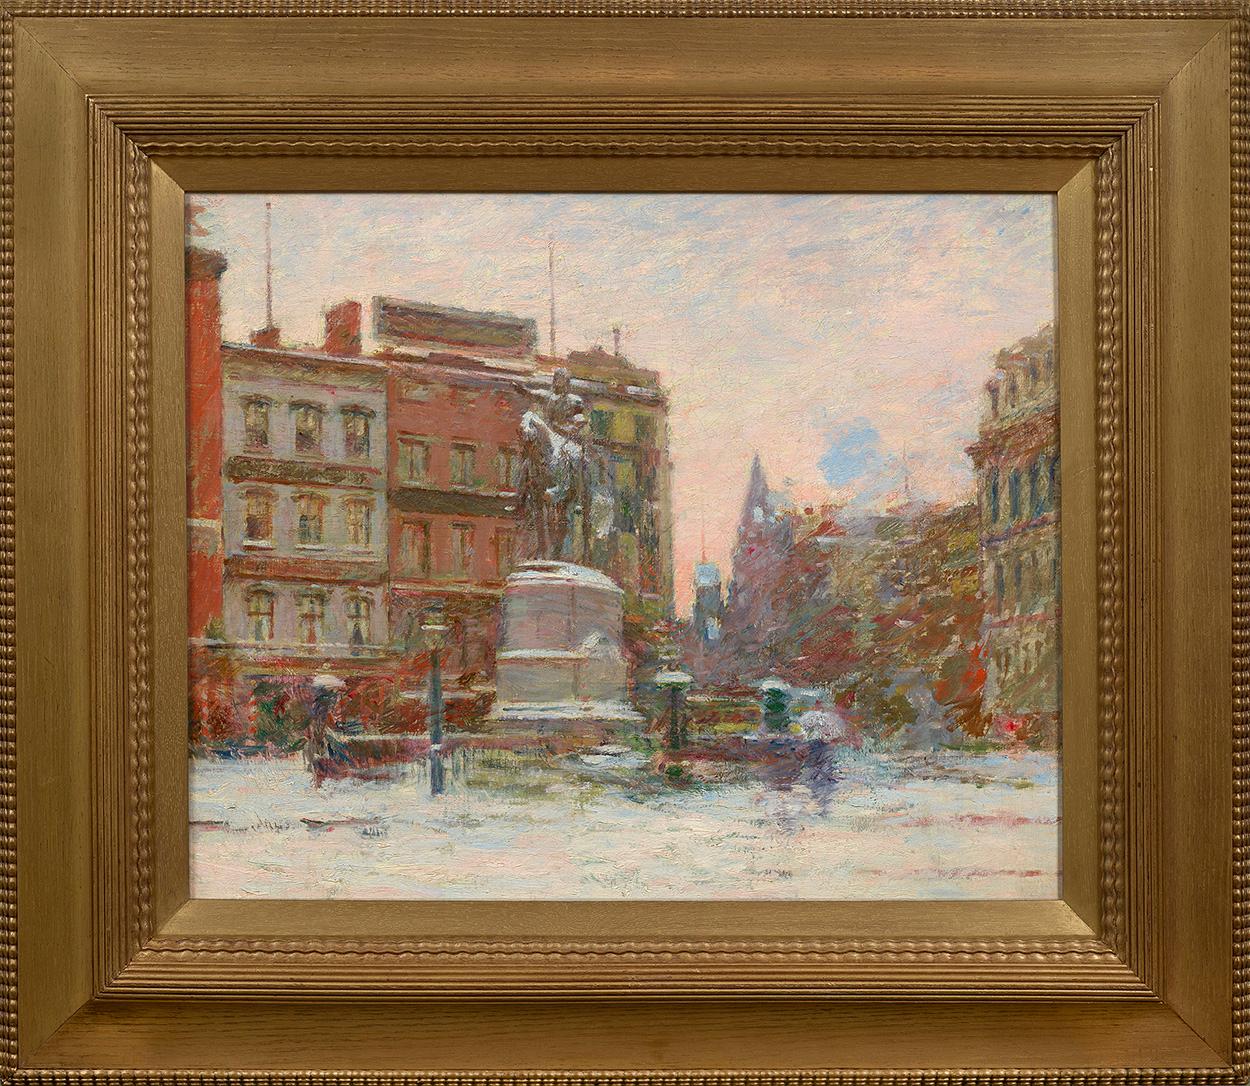 Union Square, Winter (Washington Monument) - Painting by Theodore Robinson